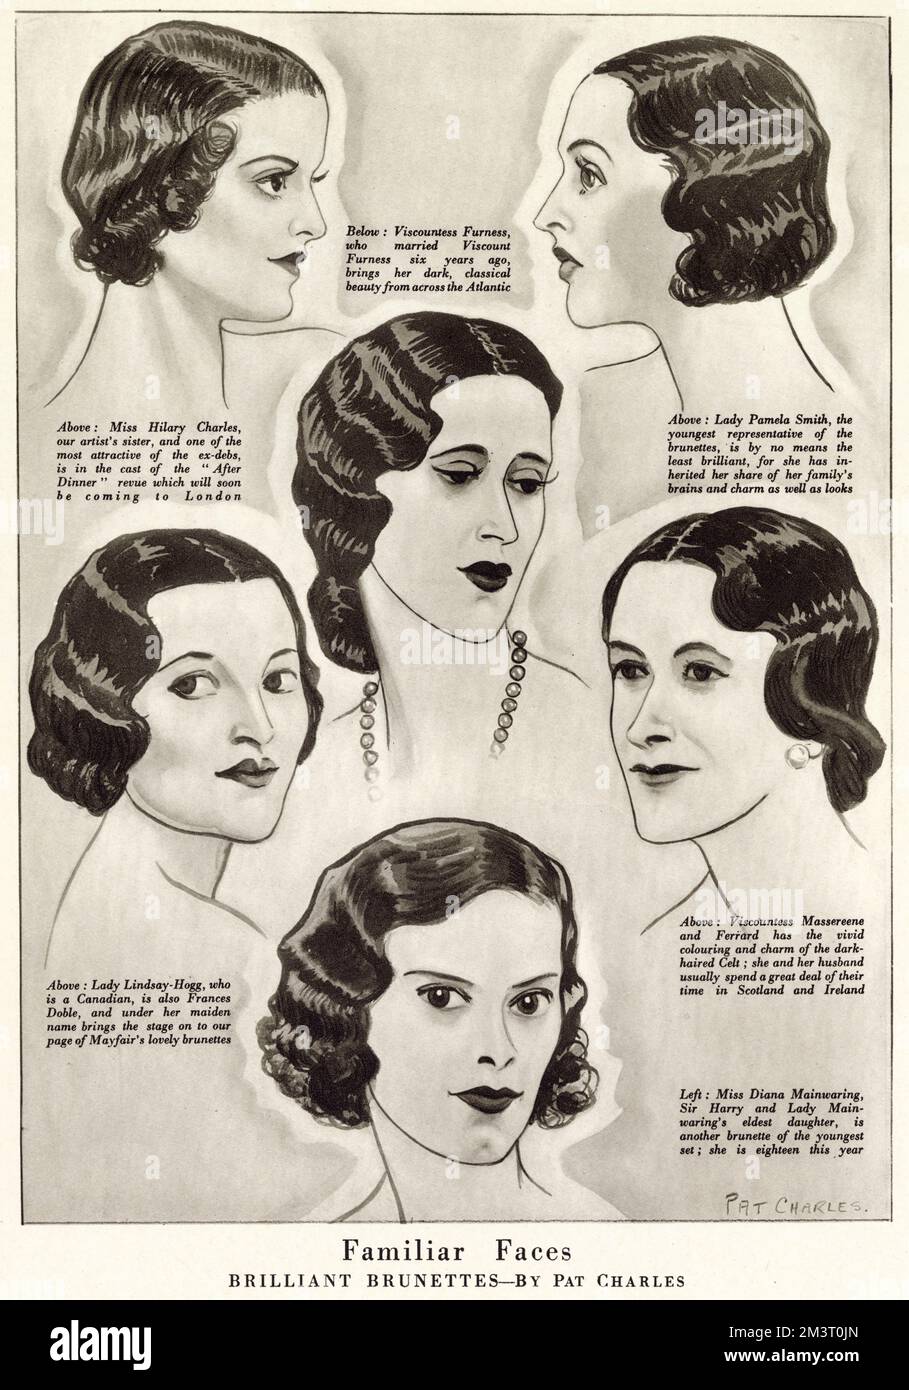 A sextet of well-known society women who happen to have brunette hair. Top left, model Hilary Charles, sister of the artist Pat Charles, top right Lady Pamela Smith, daughter of Lord Birkinhead, later Lady Pamela Berry, middle, Thelma, Lady Furness, for some time mistress of the Prince of Wales (King Edward VIII), bottom left, Lady Lindsay-Hogg, the former actress Frances Doble, bottom right, Viscountess Massereene and Ferrard and bottom centre, Miss Diana Mainwaring.     Date: 1932 Stock Photo